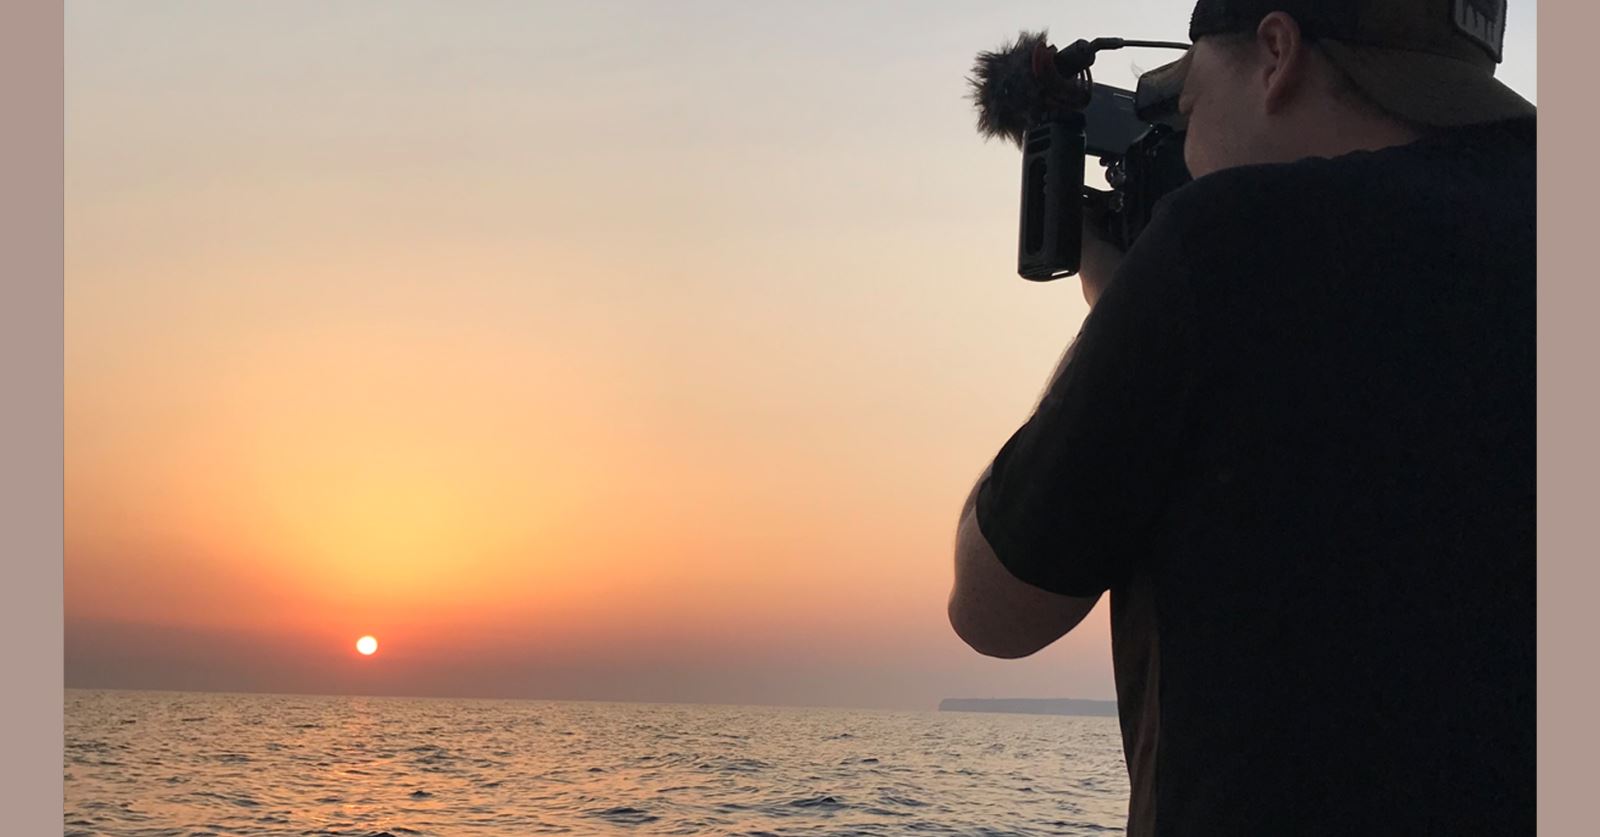 GTC welcomes new member Lex Ramsay, seen here shooting for Sky News in Lampedusa covering the ongoing migrant crisis